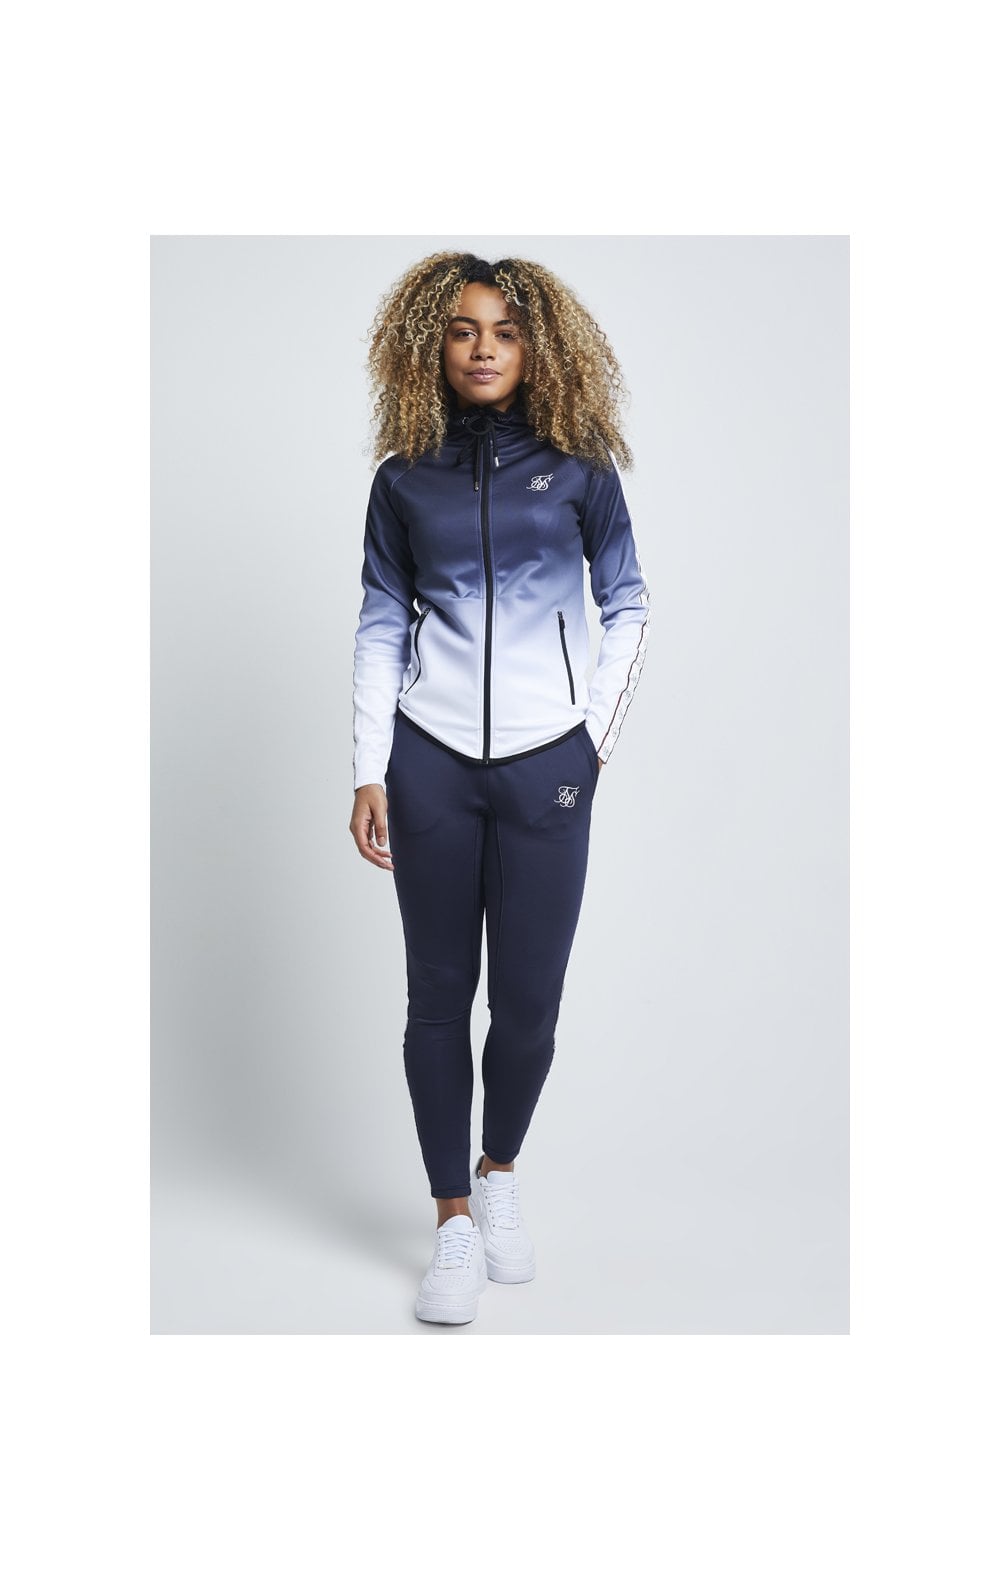 Load image into Gallery viewer, SikSilk Tape Athlete Track Pants - Ebony (1)